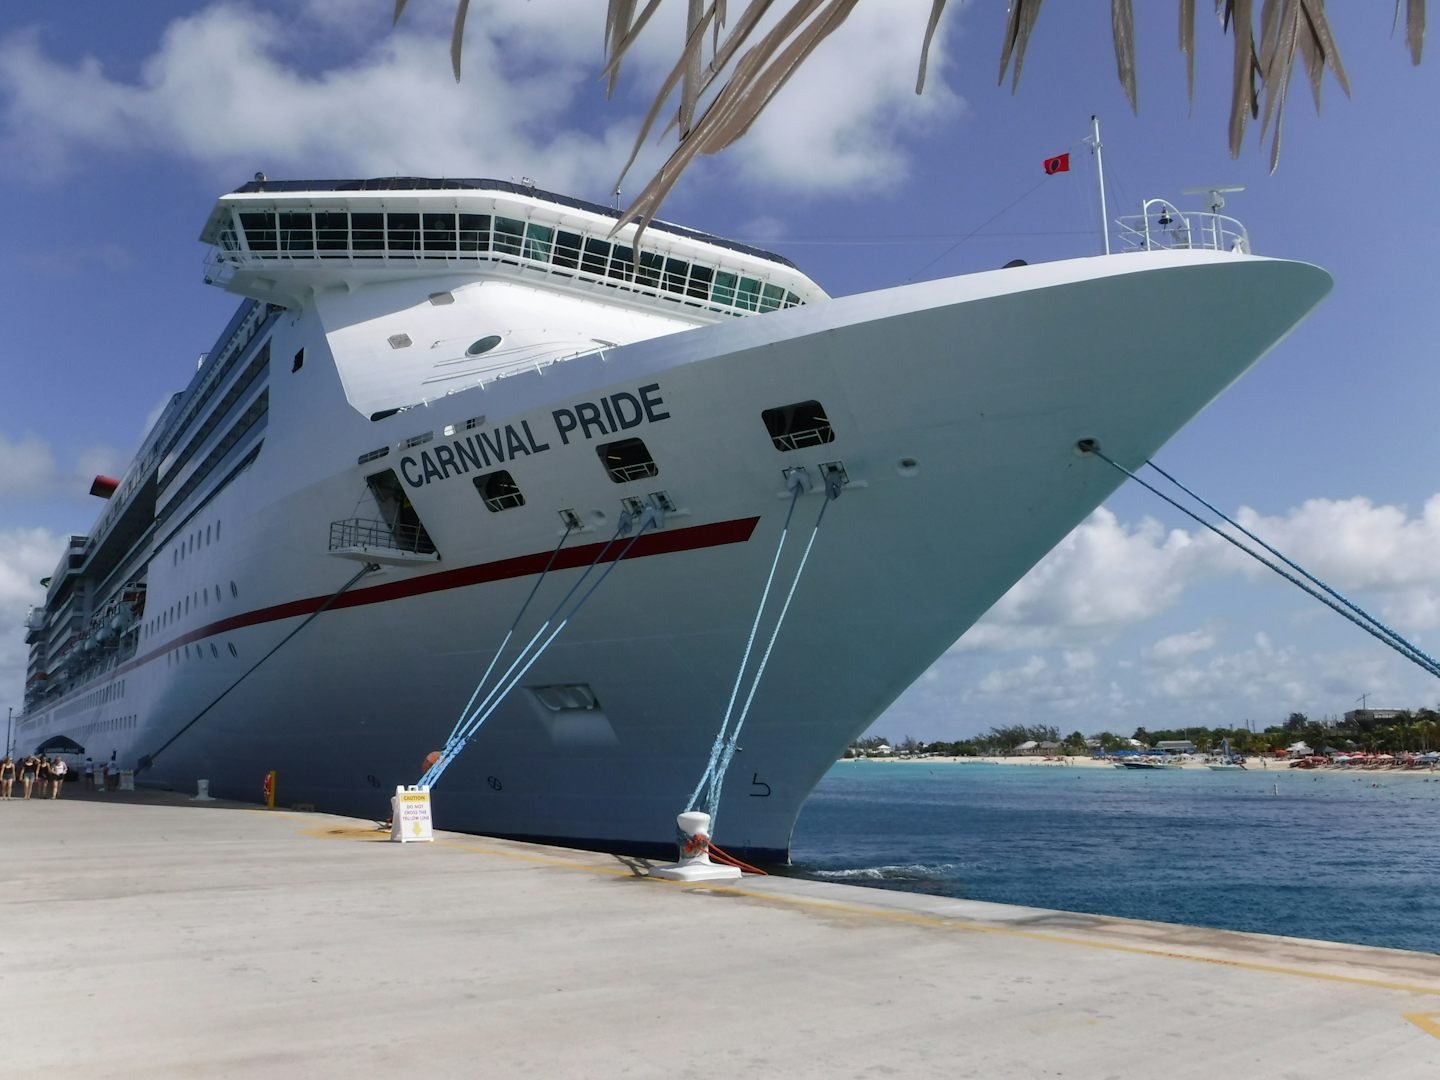 The ship at Grand Turk pier